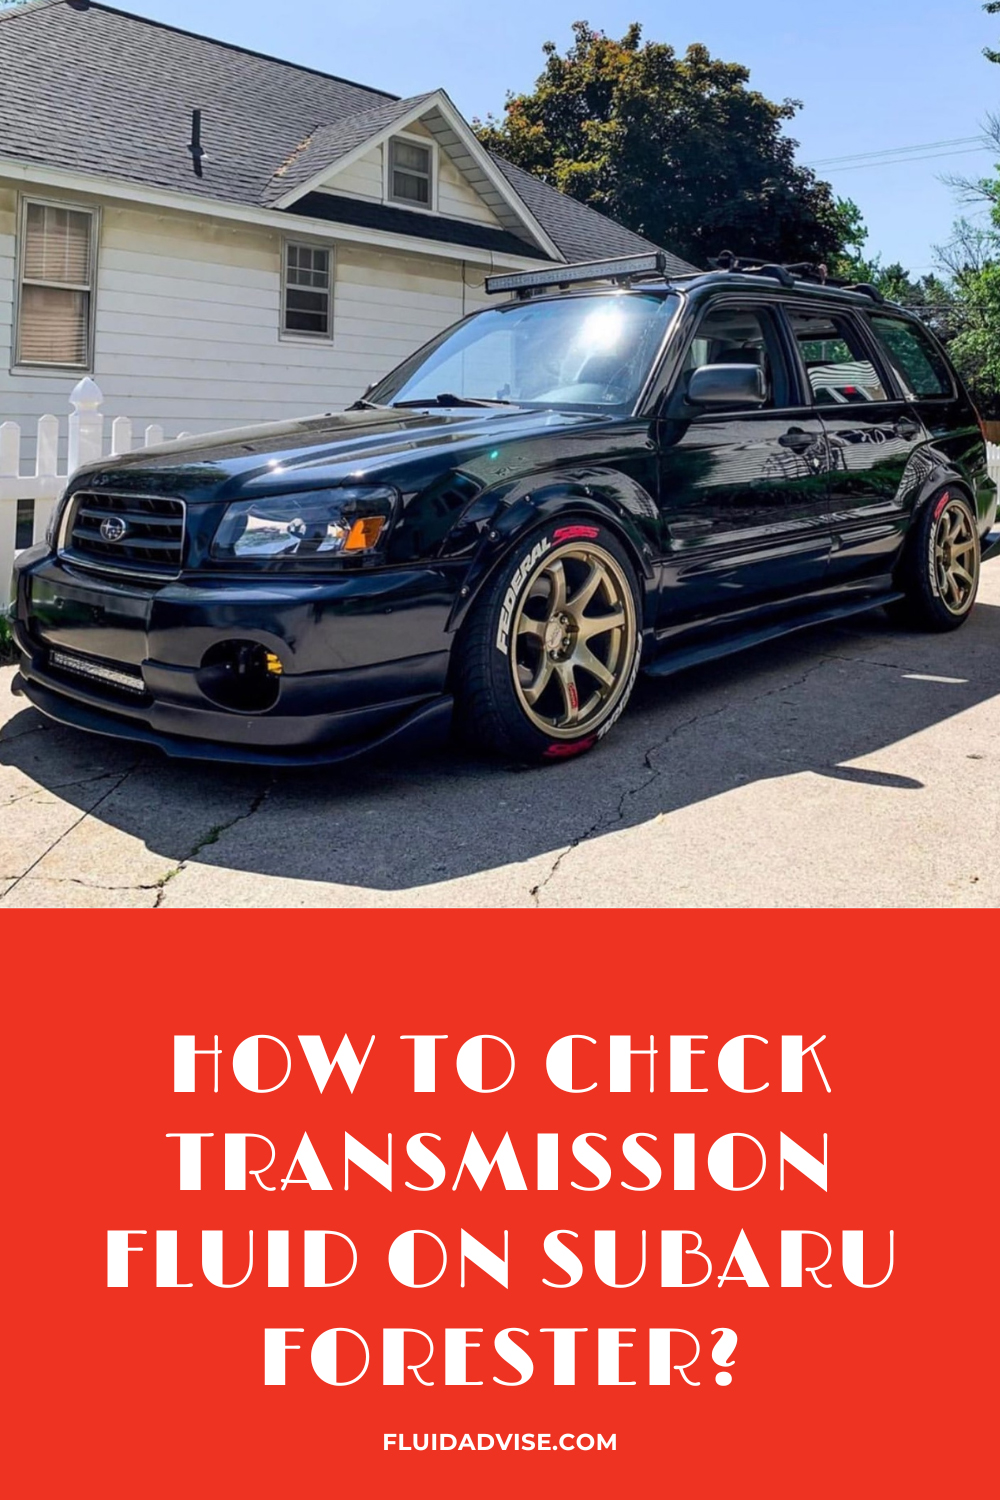 Checking Transmission Fluid on Subaru Forester